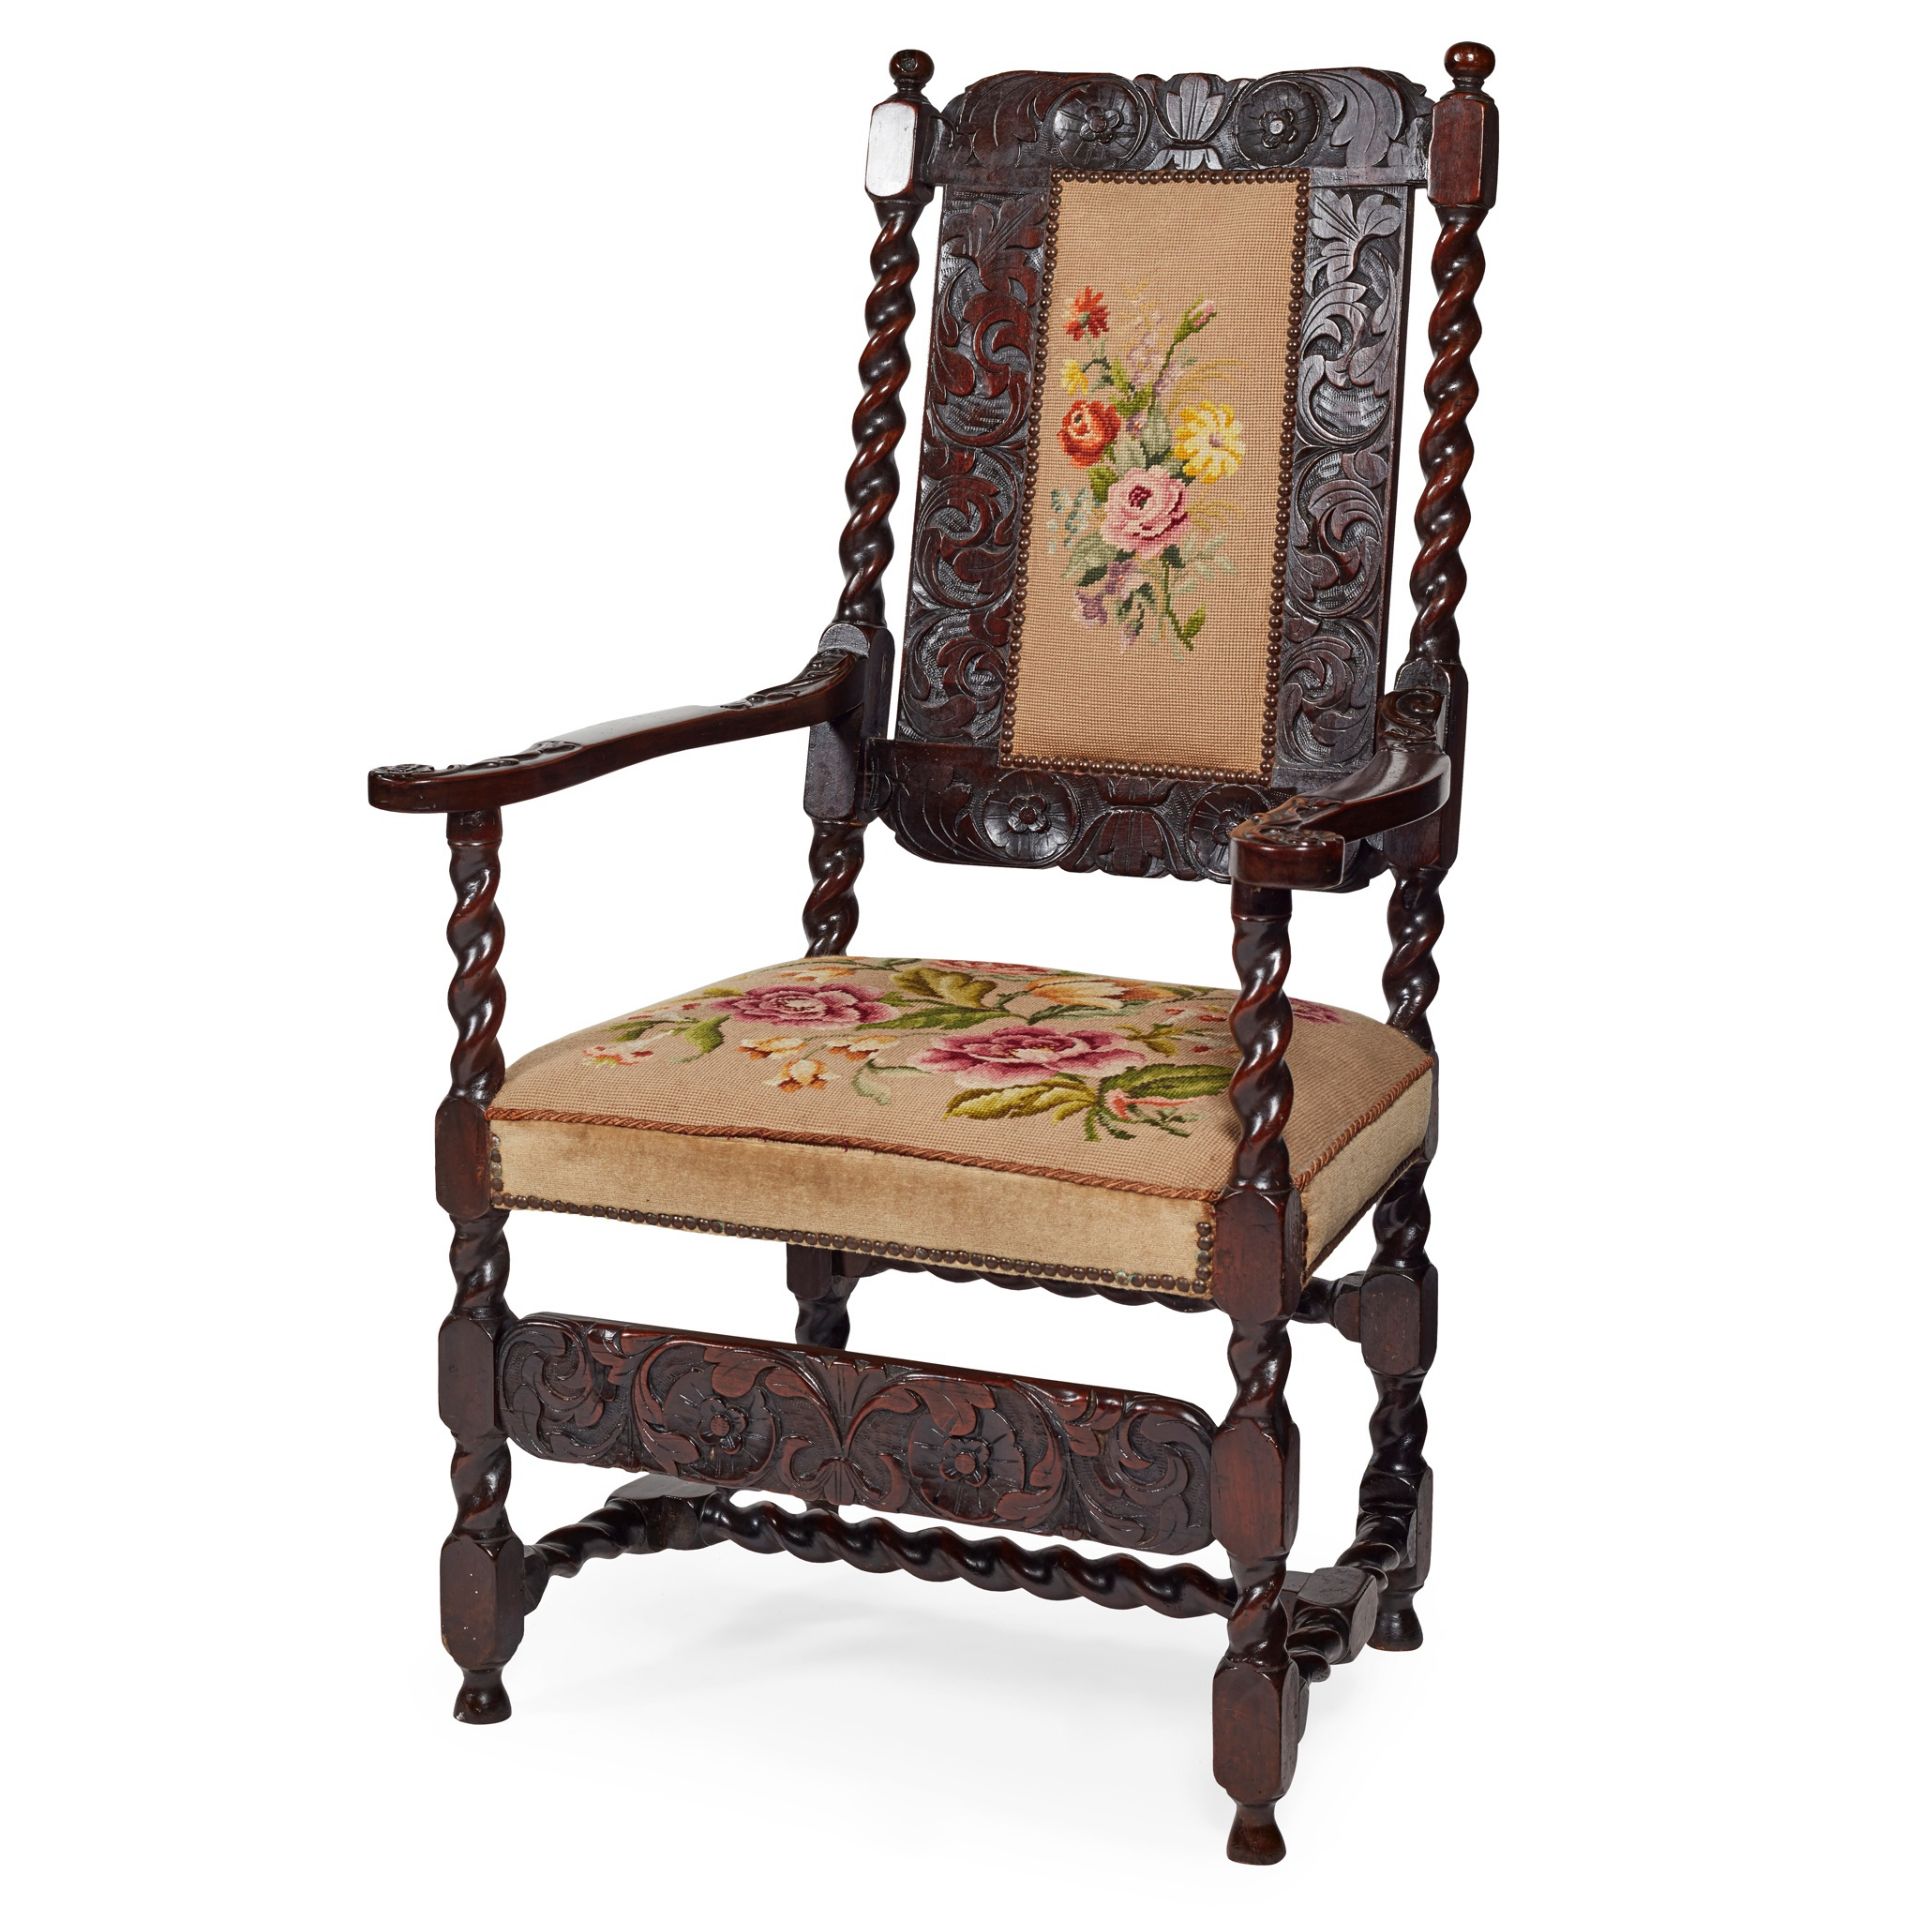 QUEEN ANNE STYLE CARVED AND STAINED OAK NEEDLEWORK ARMCHAIR 19TH CENTURY